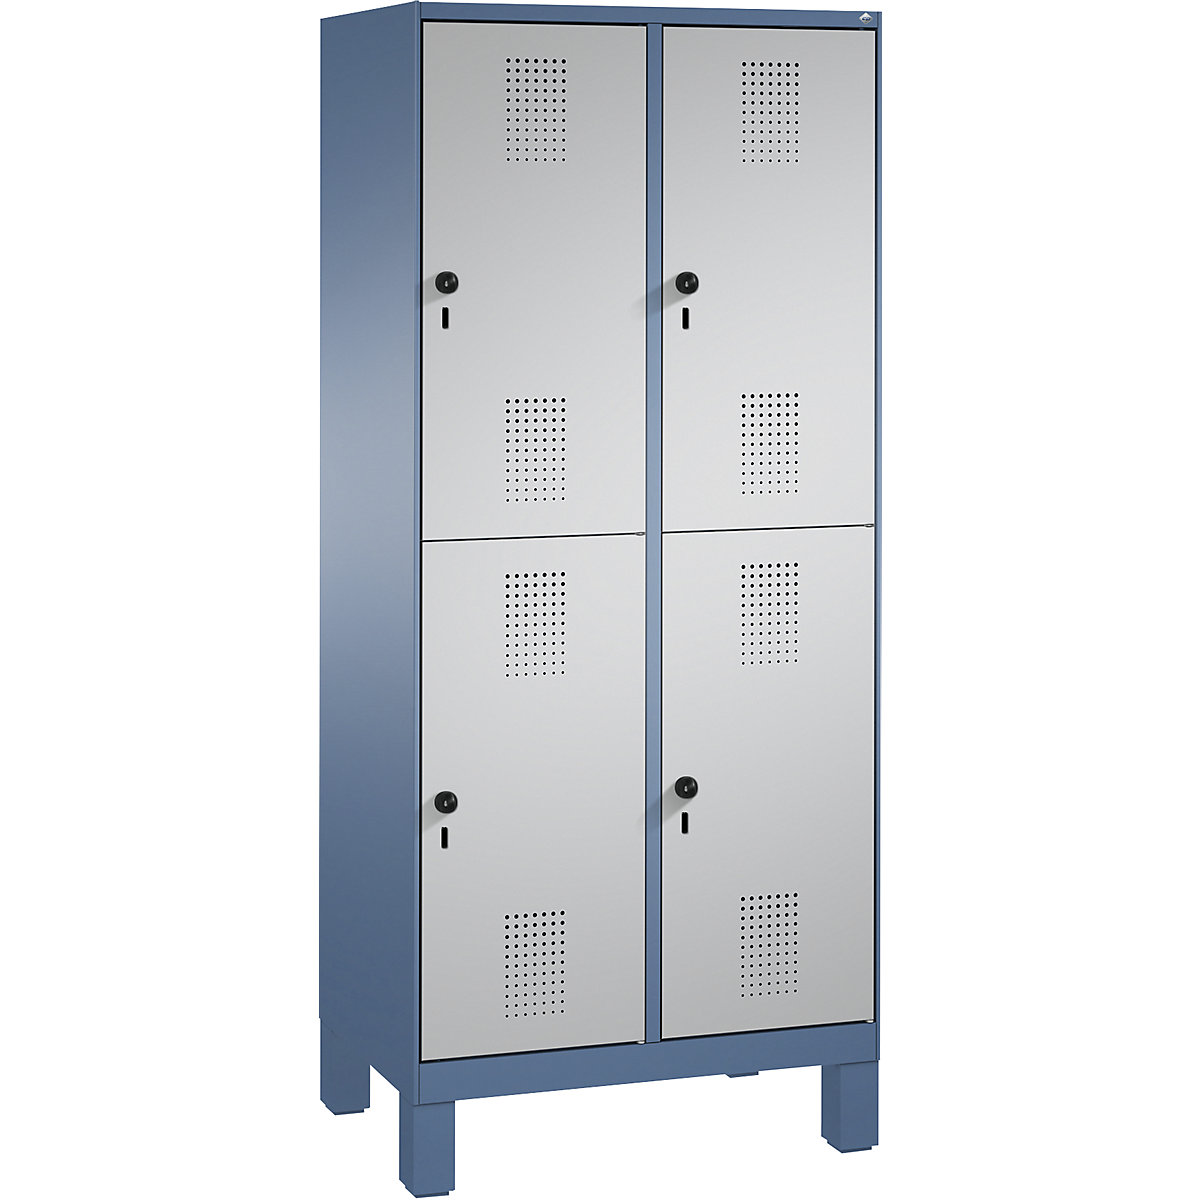 EVOLO cloakroom locker, double tier, with feet – C+P, 2 compartments, 2 shelf compartments each, compartment width 400 mm, distant blue / white aluminium-6